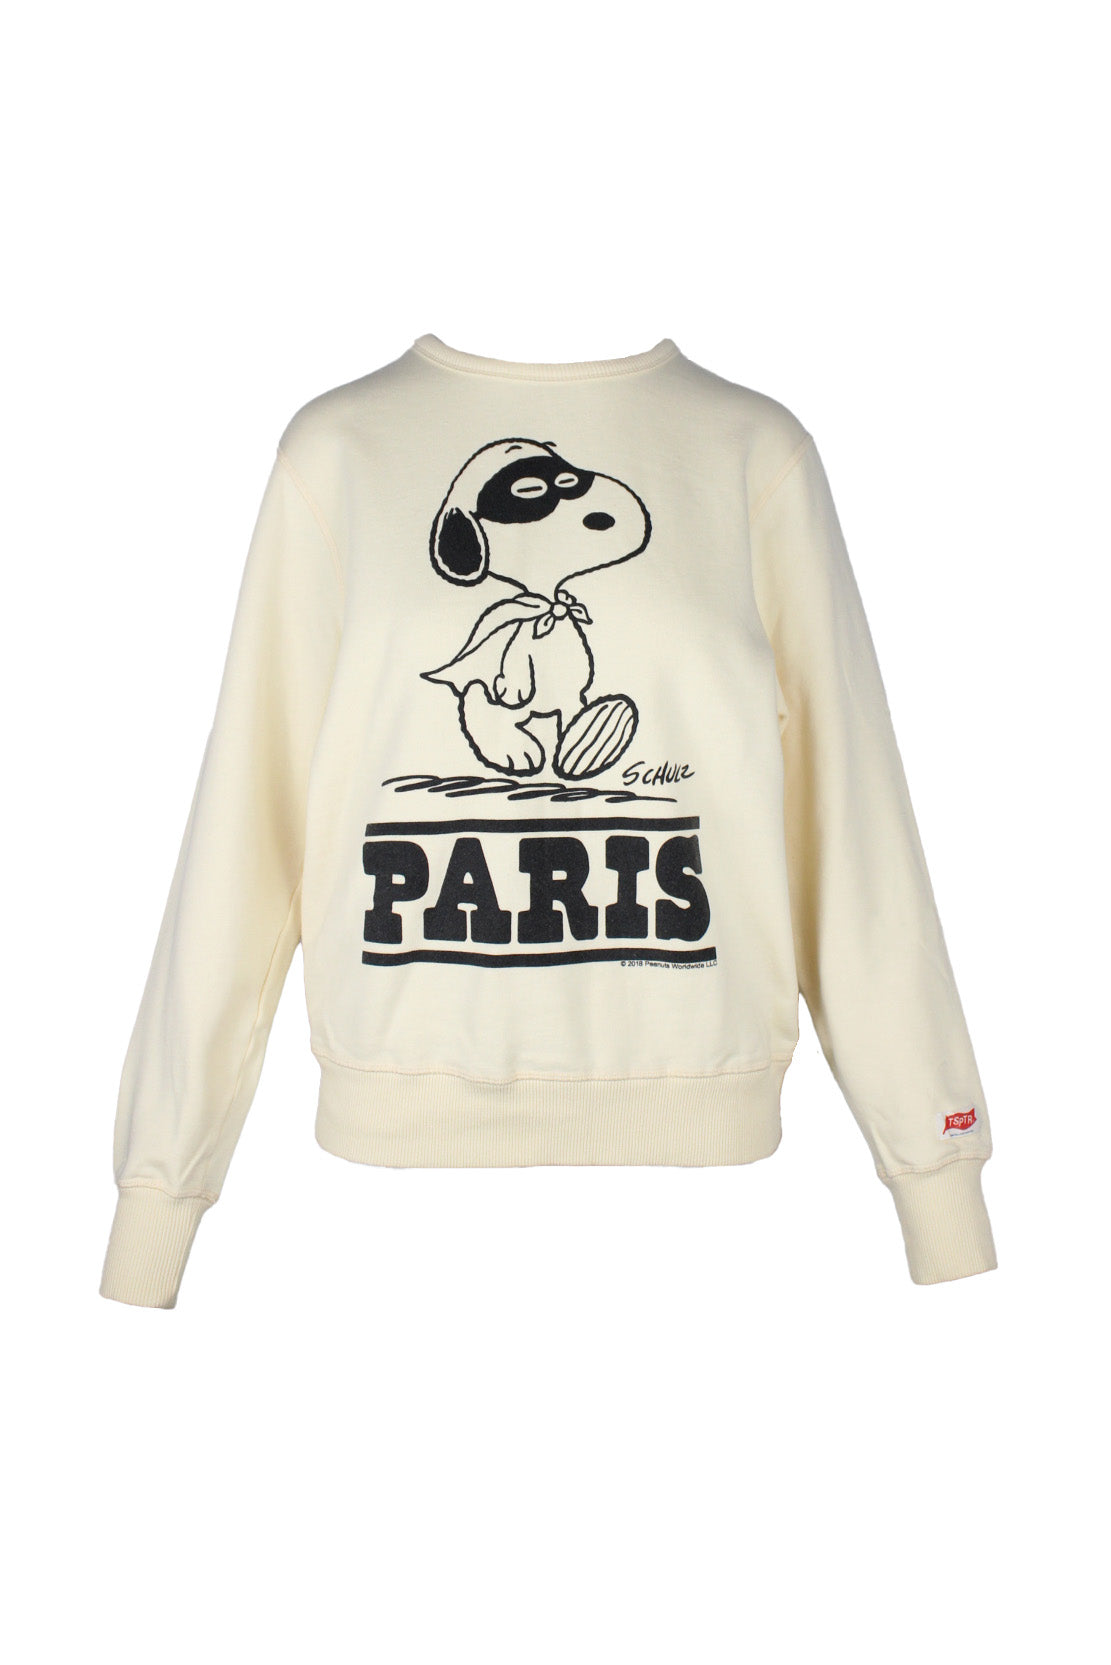 description: sporting good beige snoopy long sleeve sweatshirt. features ribbed hem throughout, and paris snoopy graphic at front. 